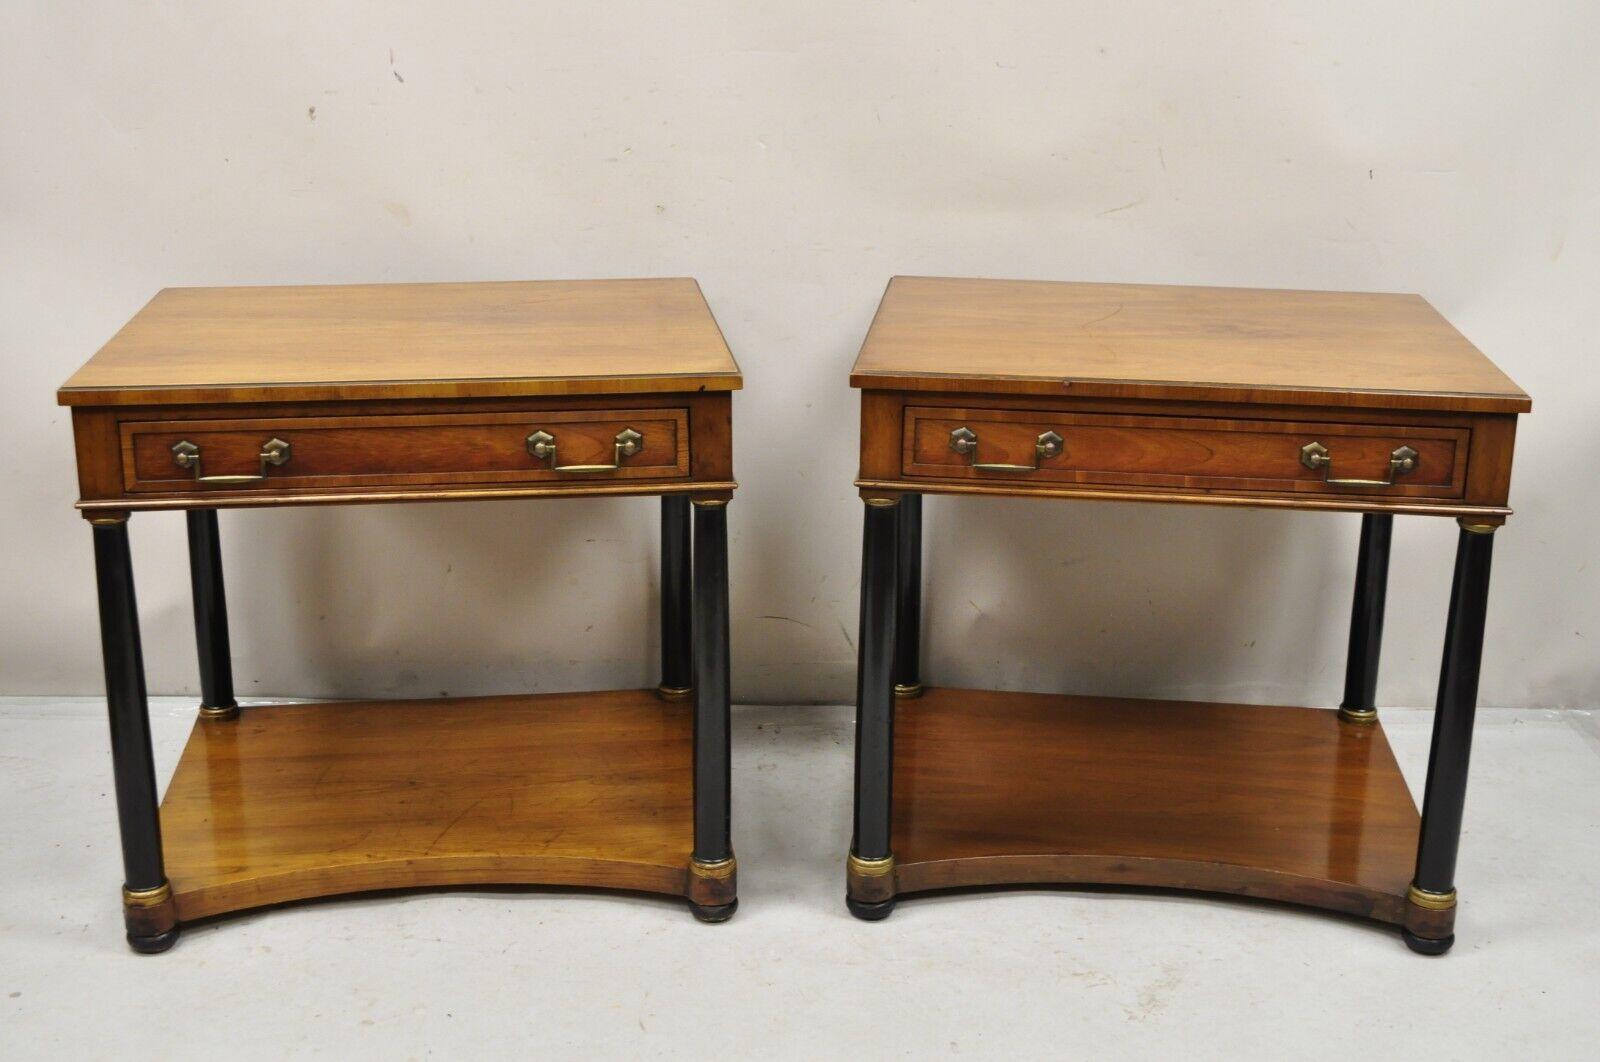 Century French Empire Style Cherry Wood Black Column 1 Drawer End Tables - Pair. Item features one dovetailed drawer, solid wood construction, finished back, original stamp, nice vintage pair. Circa Late 20th Century. Measurements: 25.5